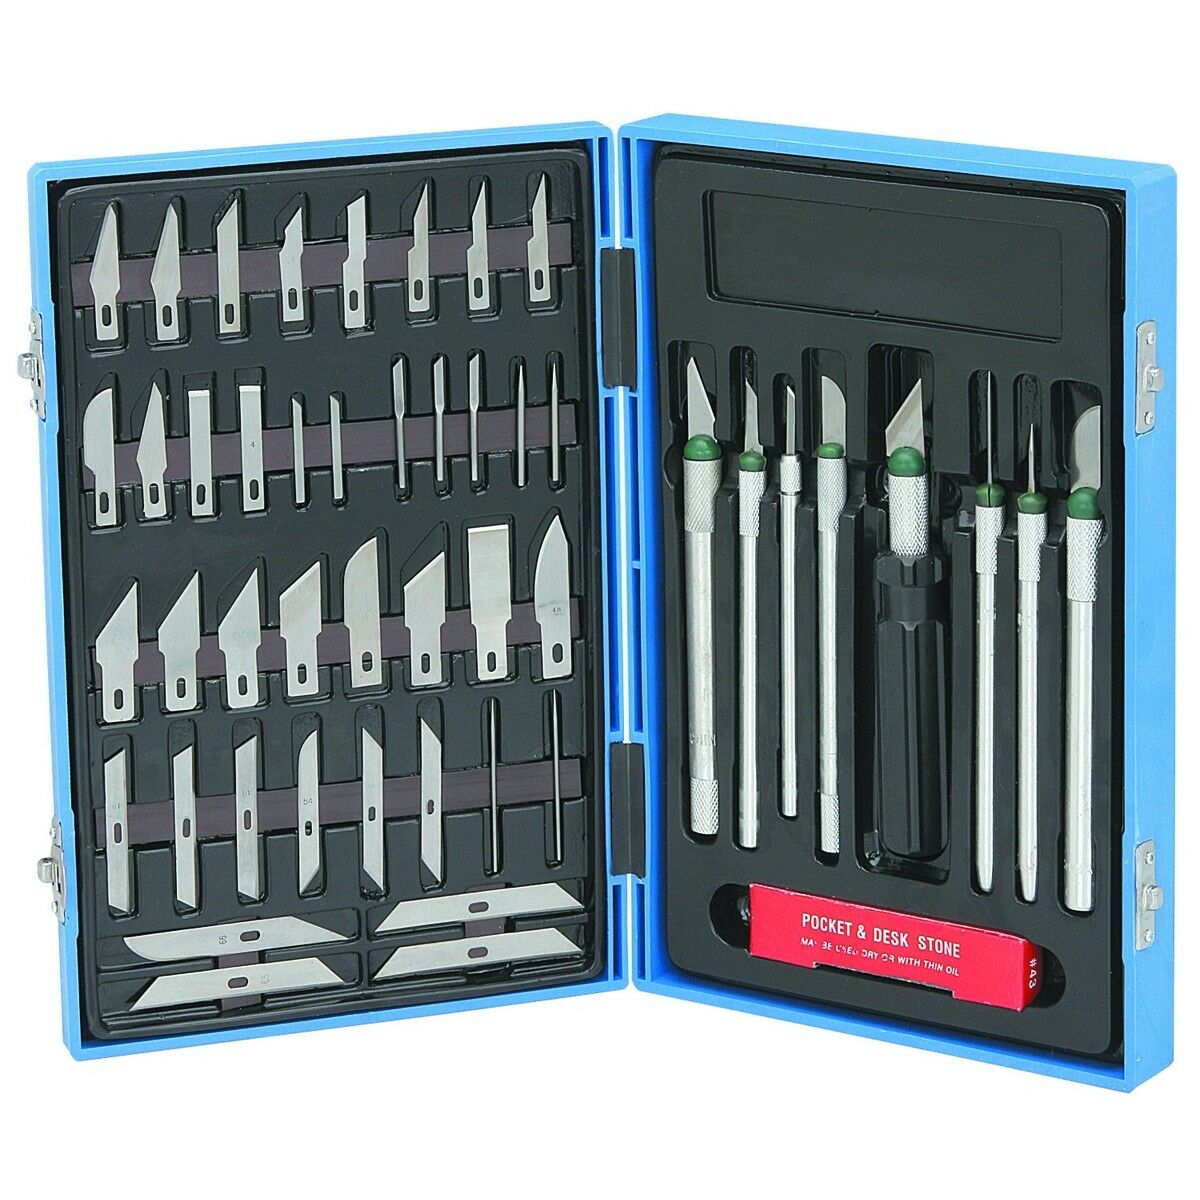 56 Pc. Precision Knife Set For Detaied Cuts! Compare To Xacto Or Name Brands